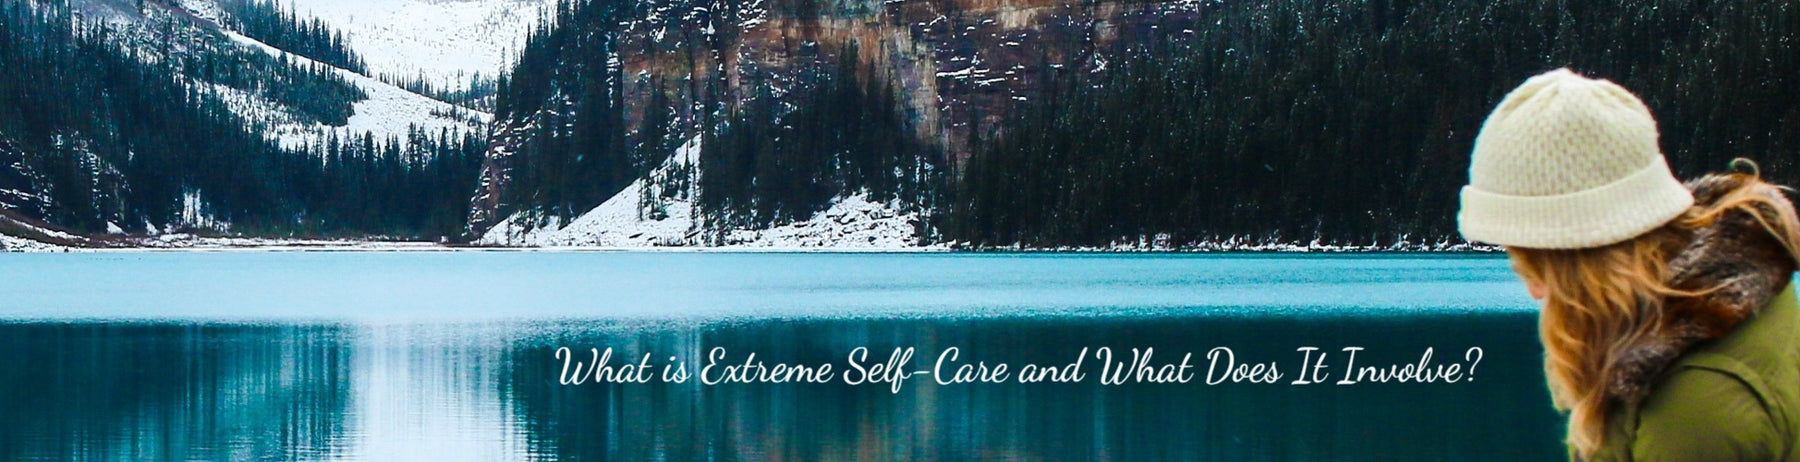 What is Extreme Self-Care and What Does It Involve?